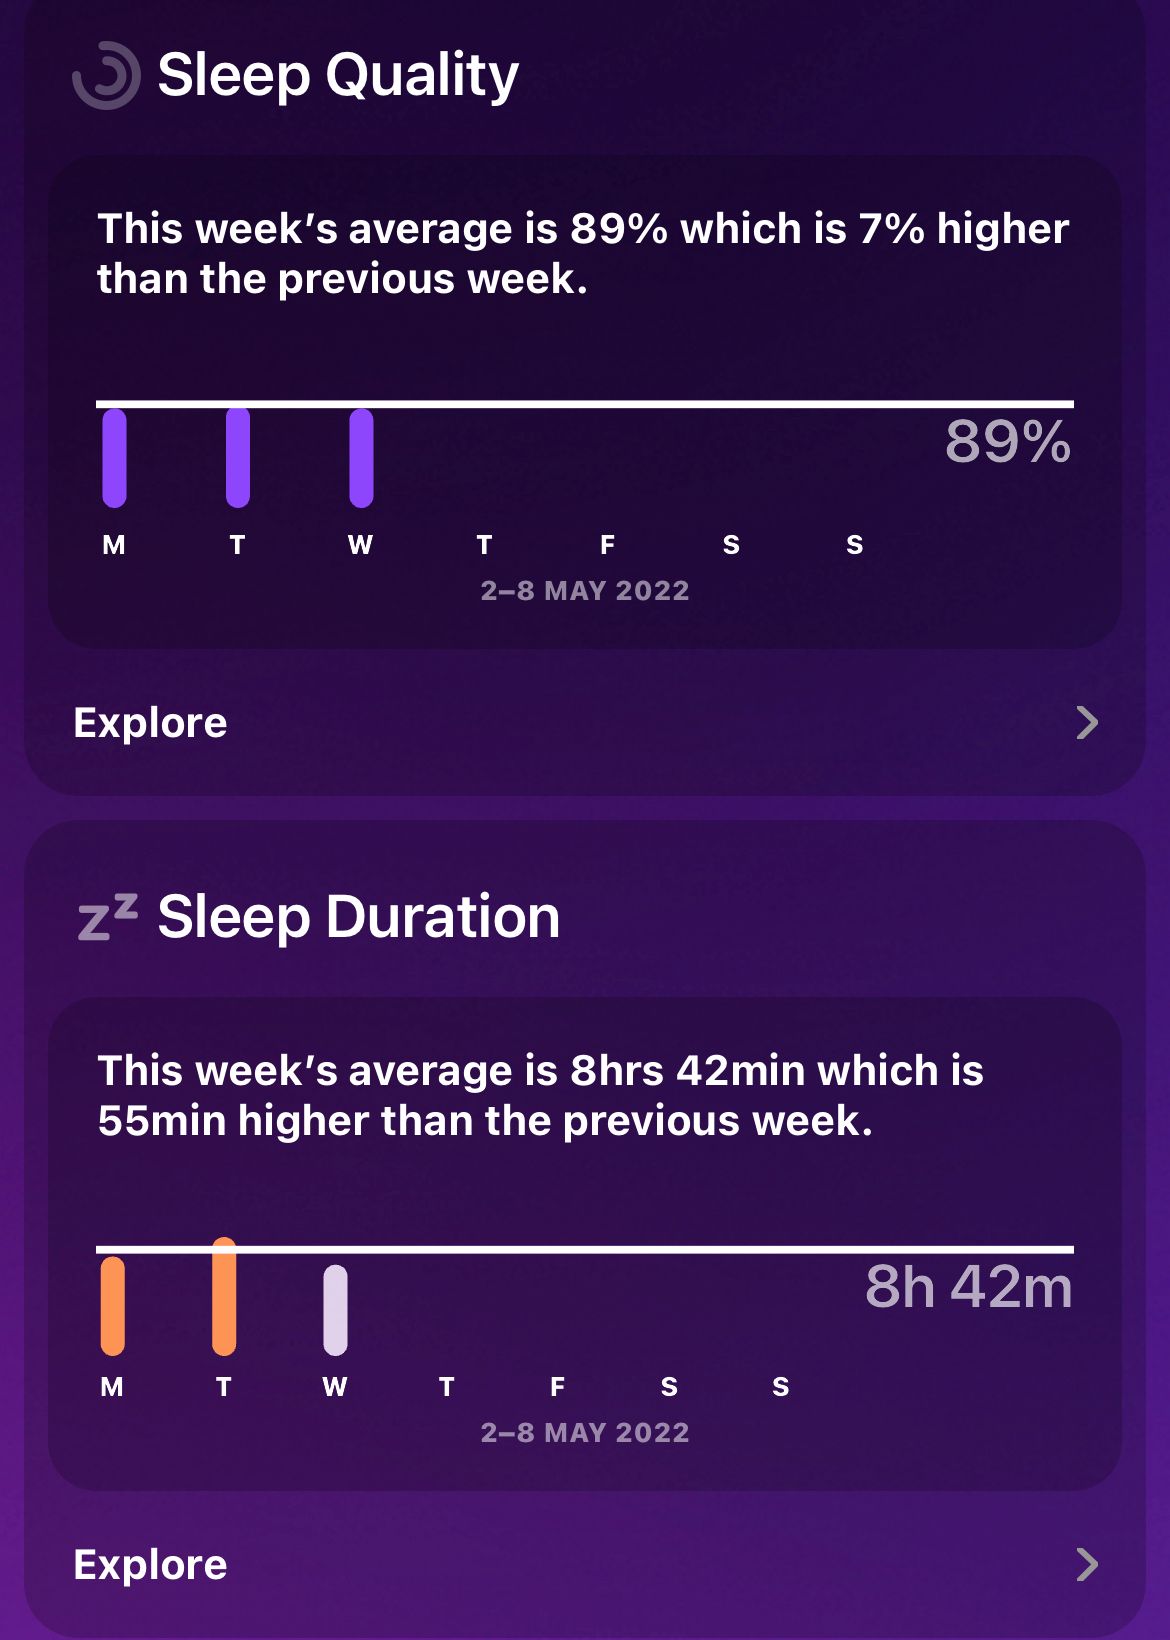 Two charts showing sleep quality and sleep duration. The former shows 89% sleep quality and the latter 8h 42m or sleep on average over the last 3 days.